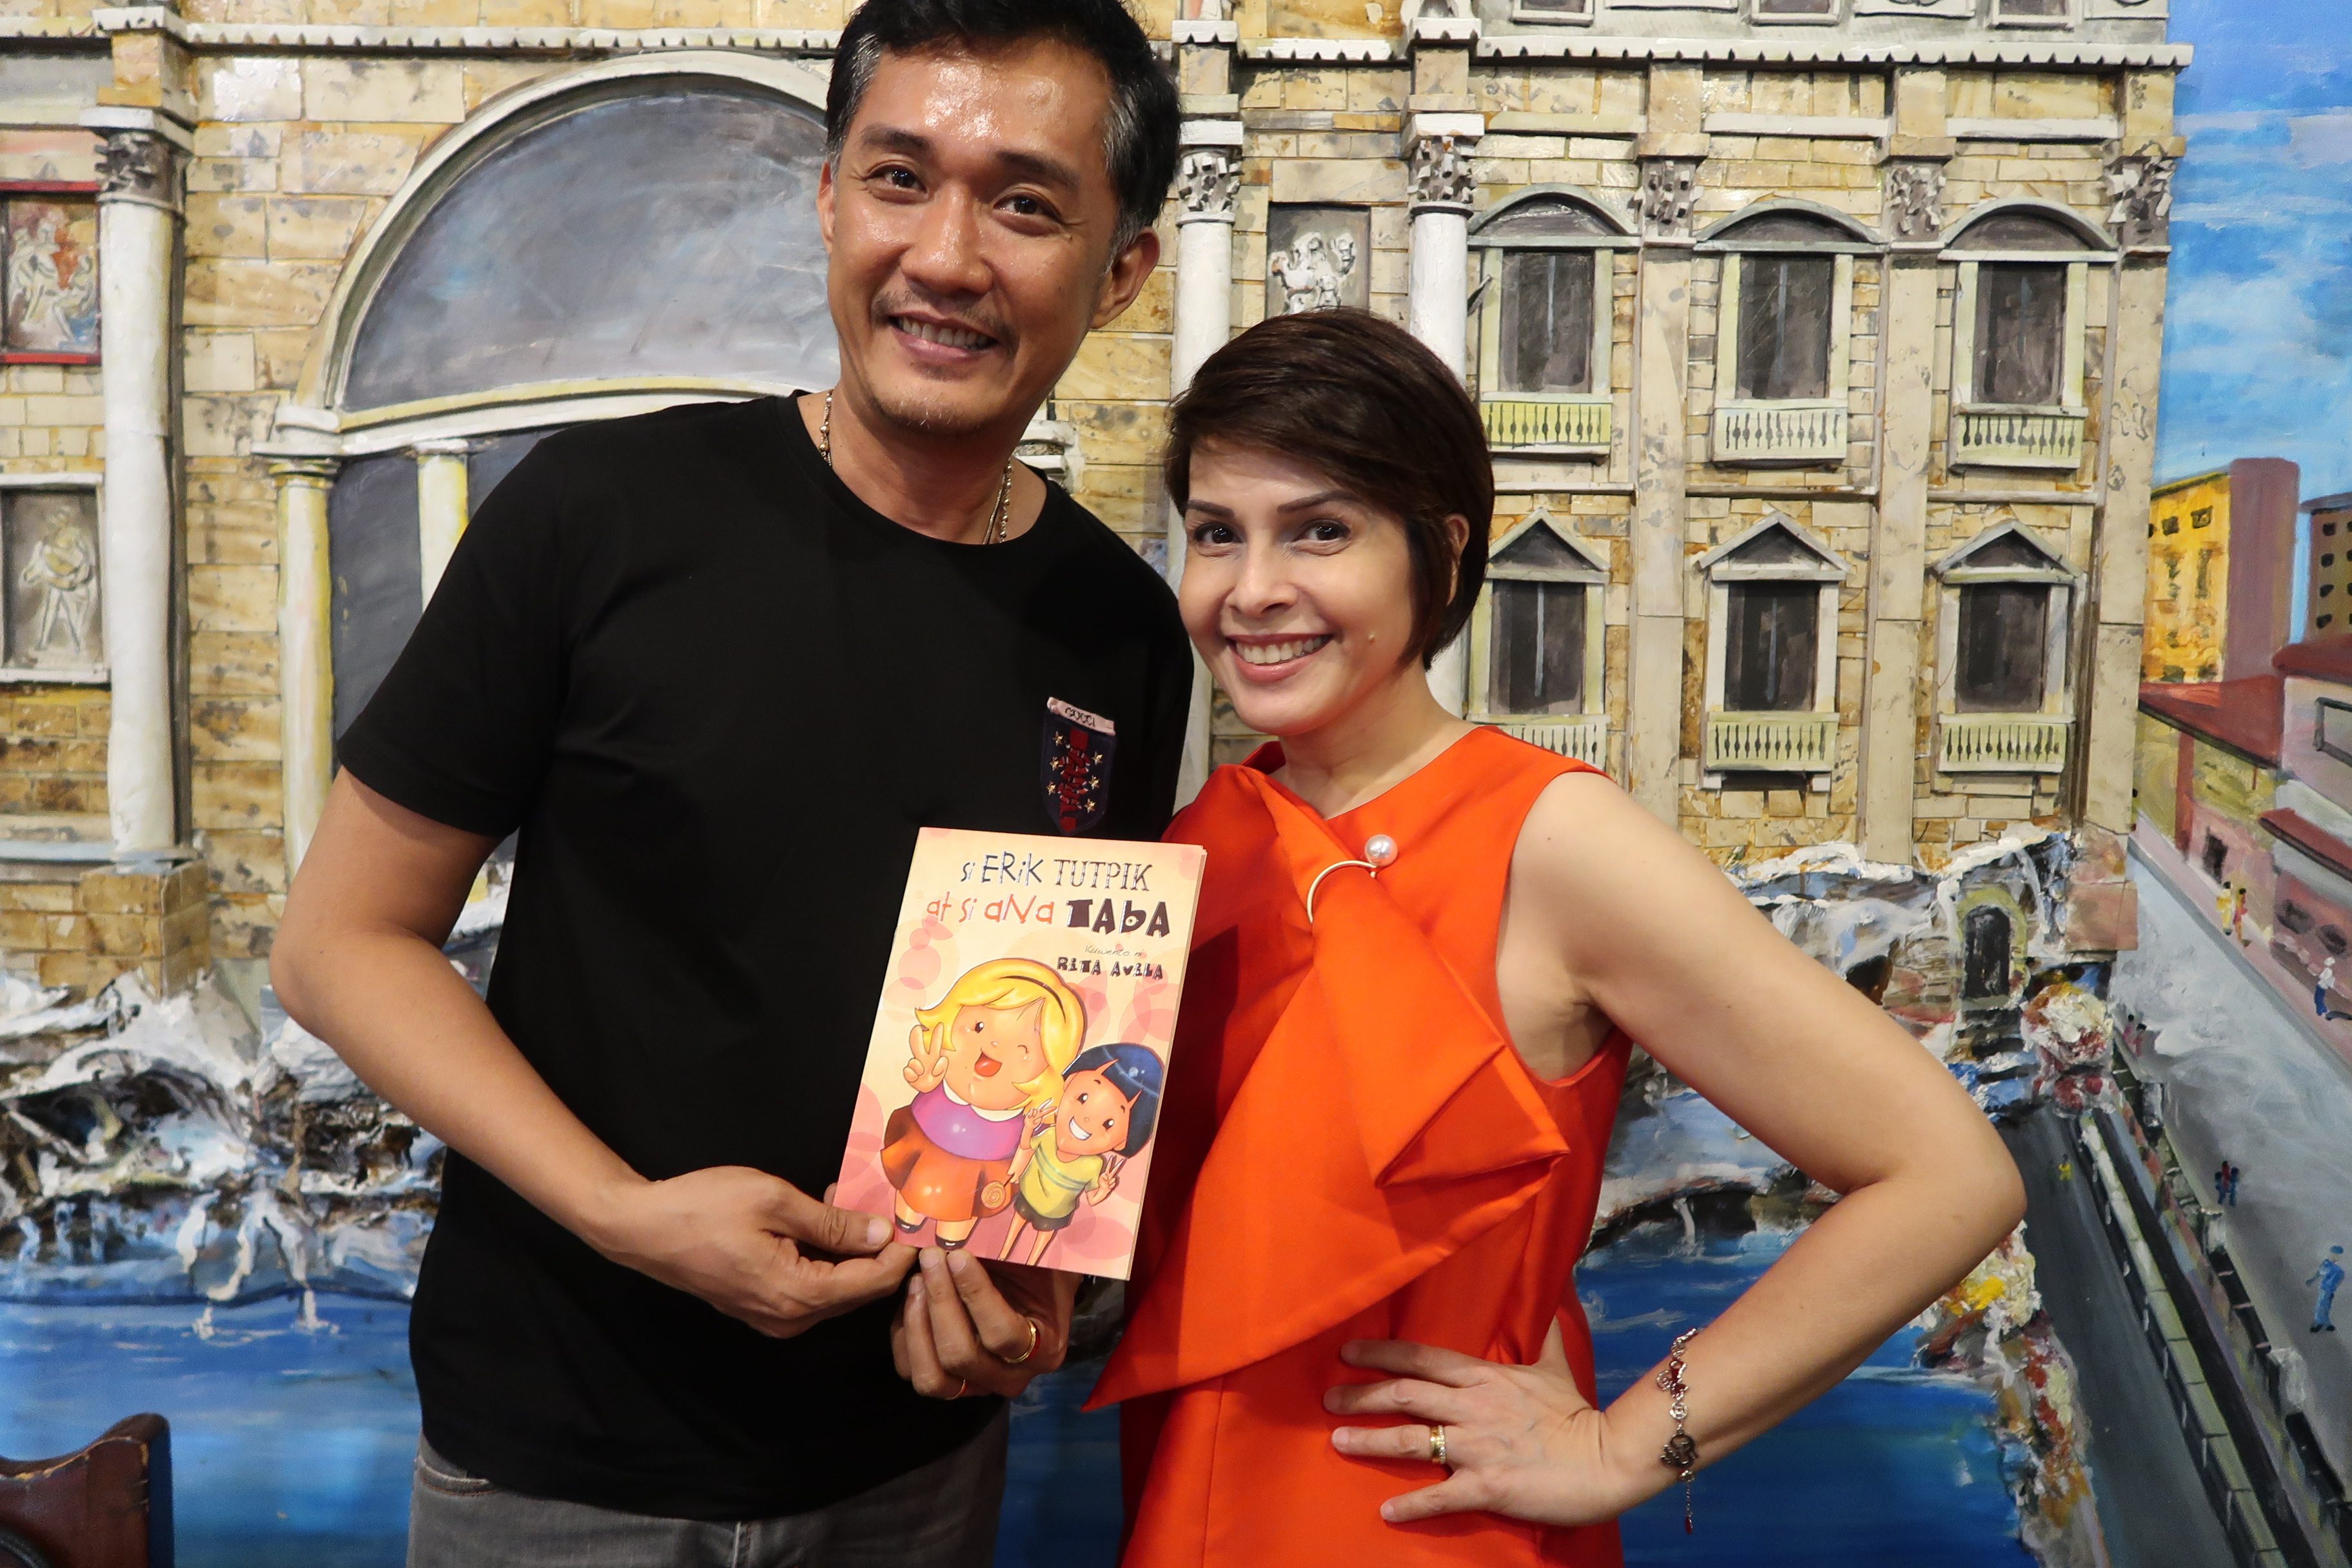 Rita and director FM Reyes holds her first children’s book, 'Si Erik Tutpik at Ana Taba,' a story loosely inspired by their childhood. 